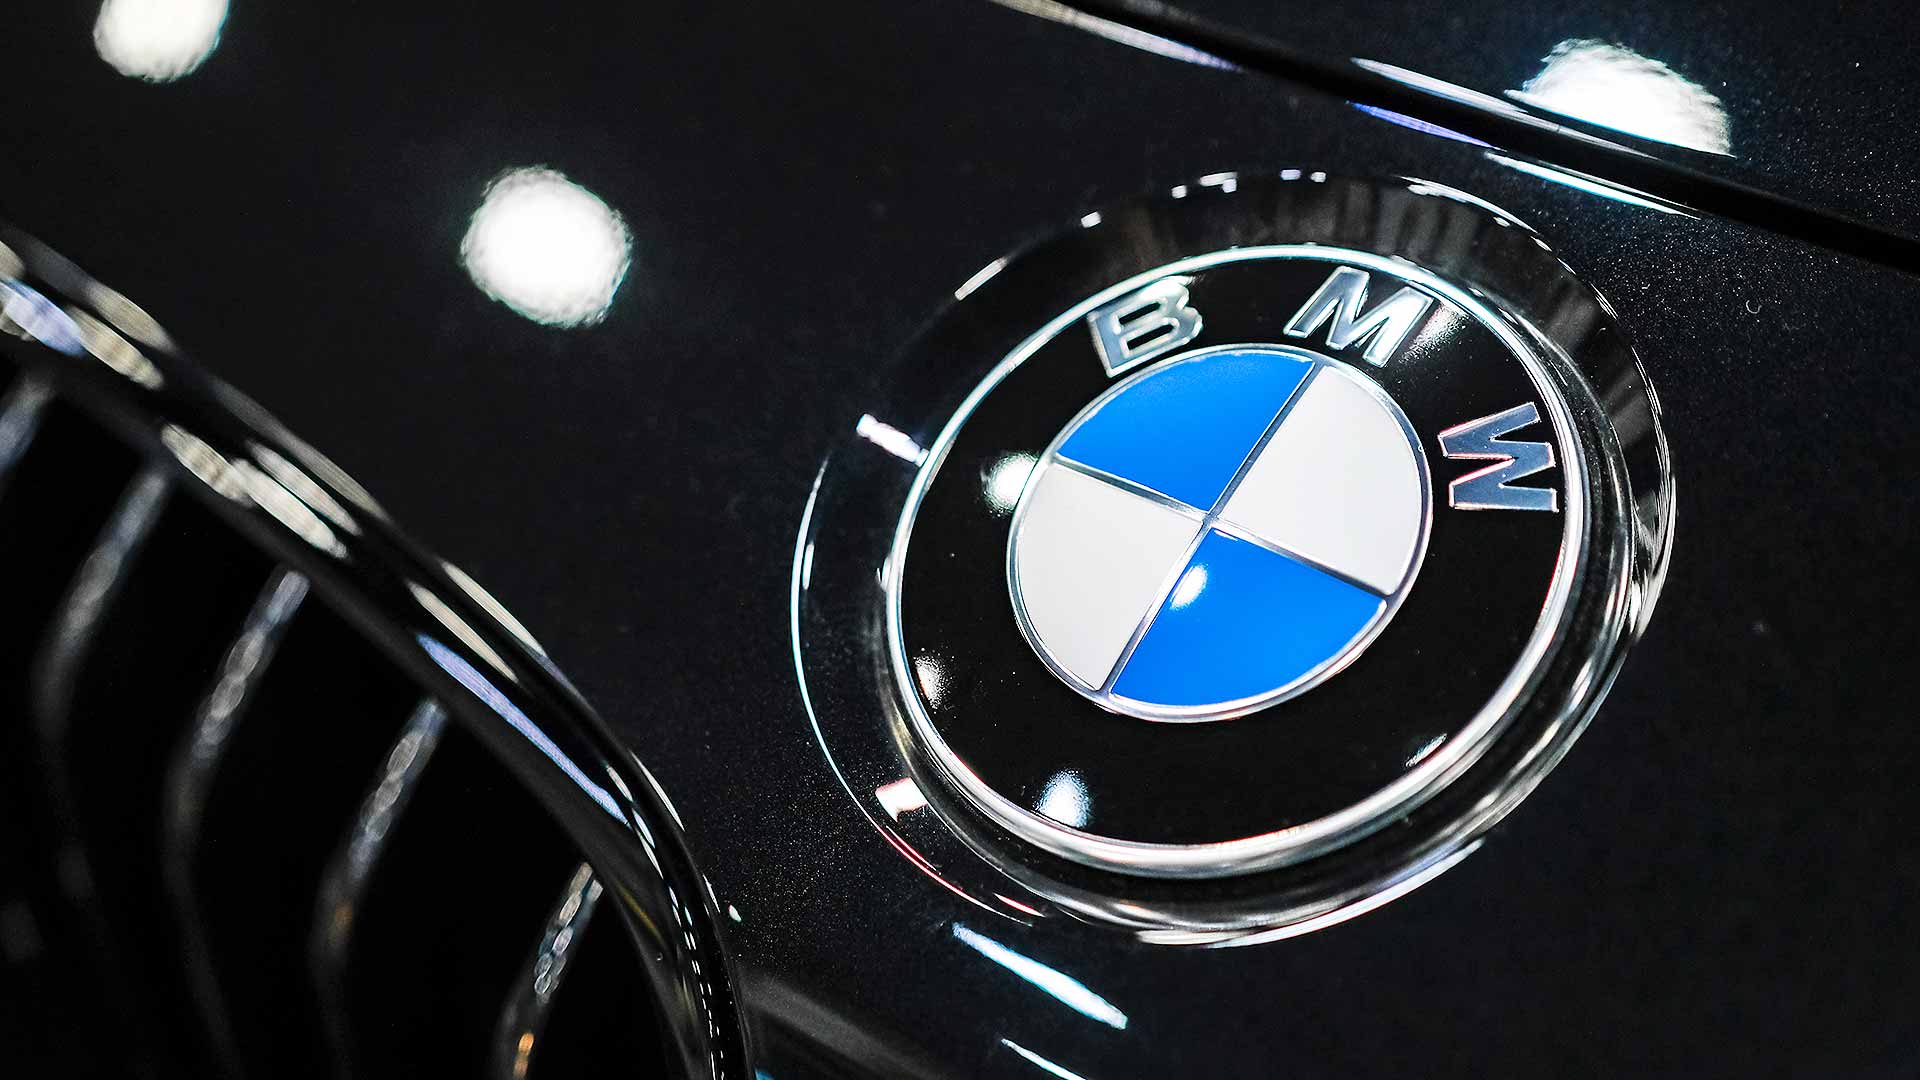  BMW  confirms new  logo  will NOT appear on cars